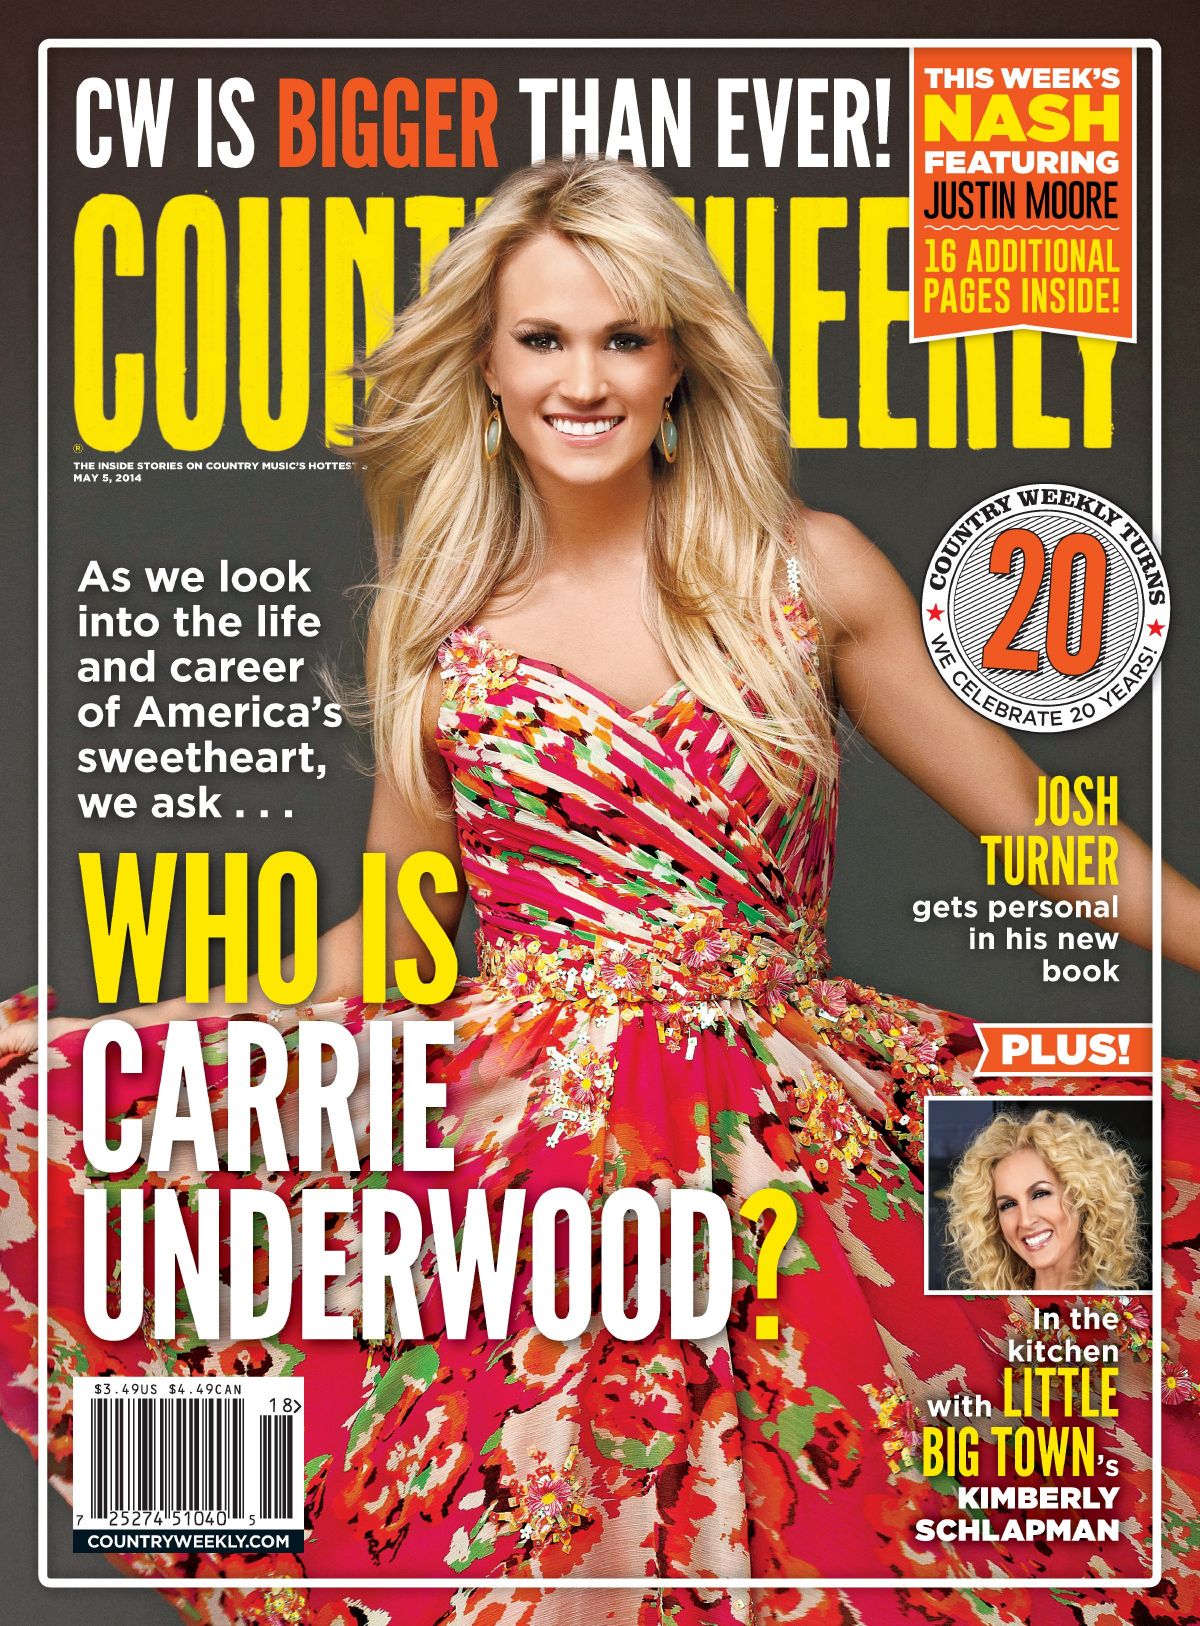 Ask magazine. Country Weekly.